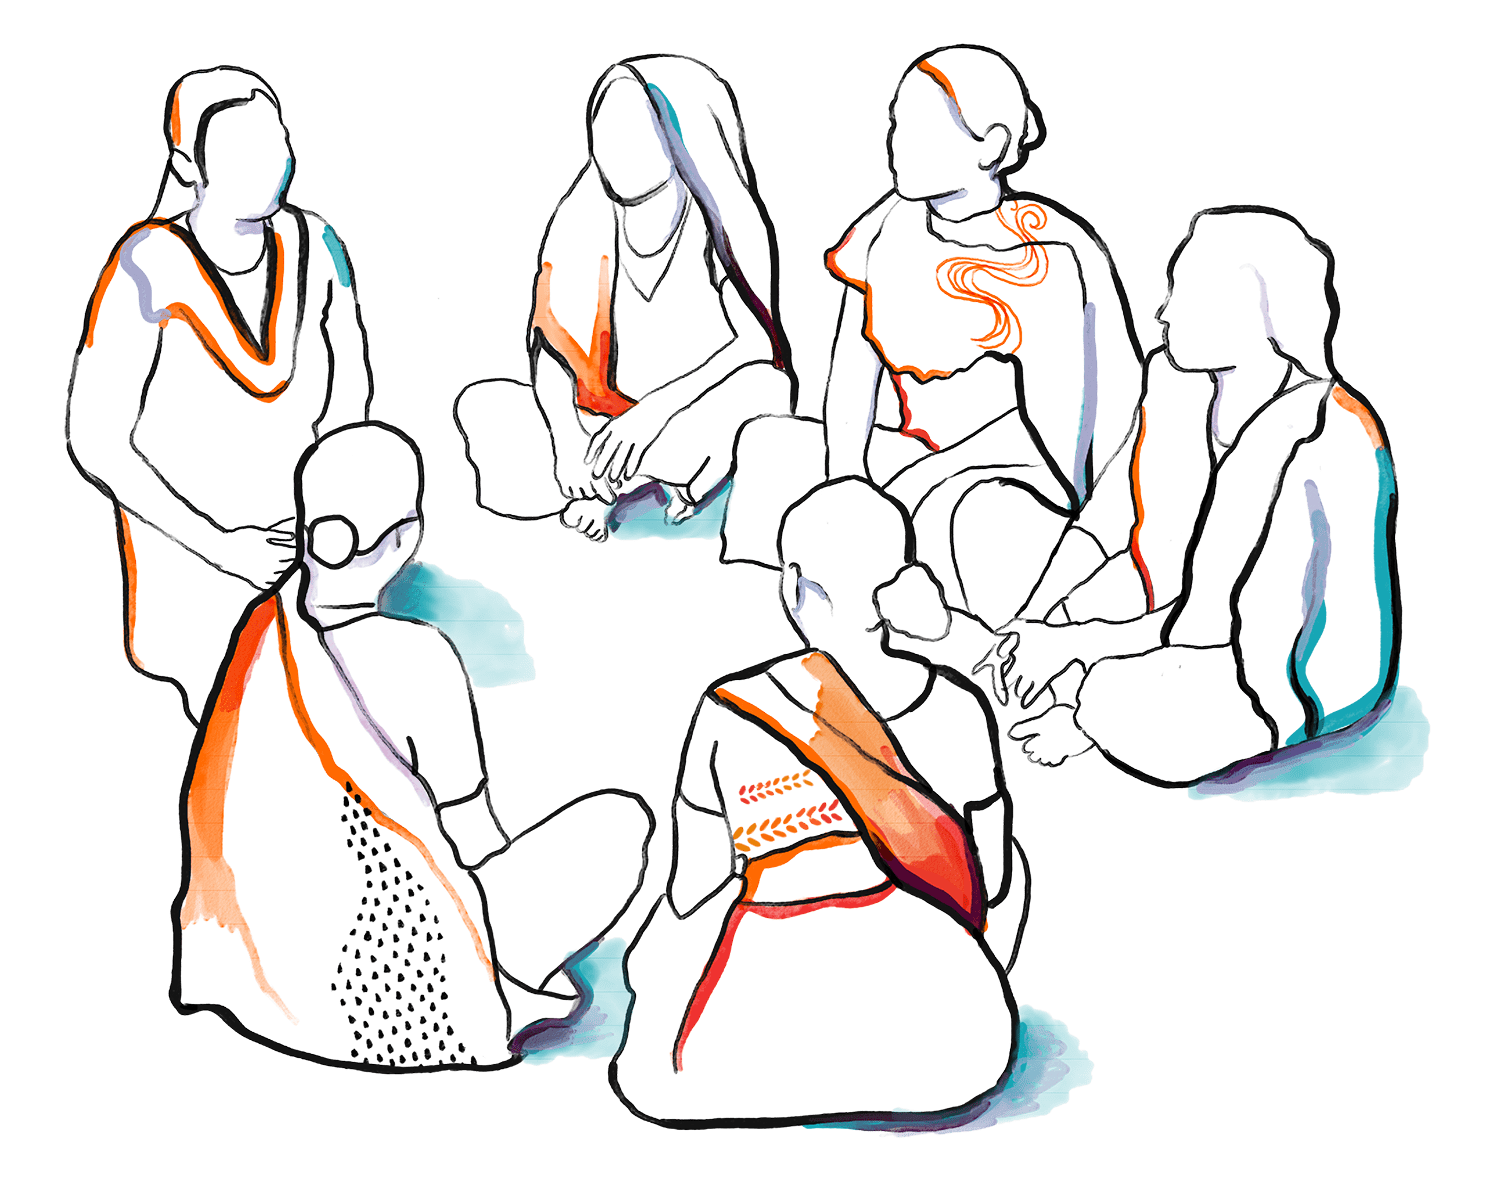 Illustration of South Asian women in a workshop or discussion